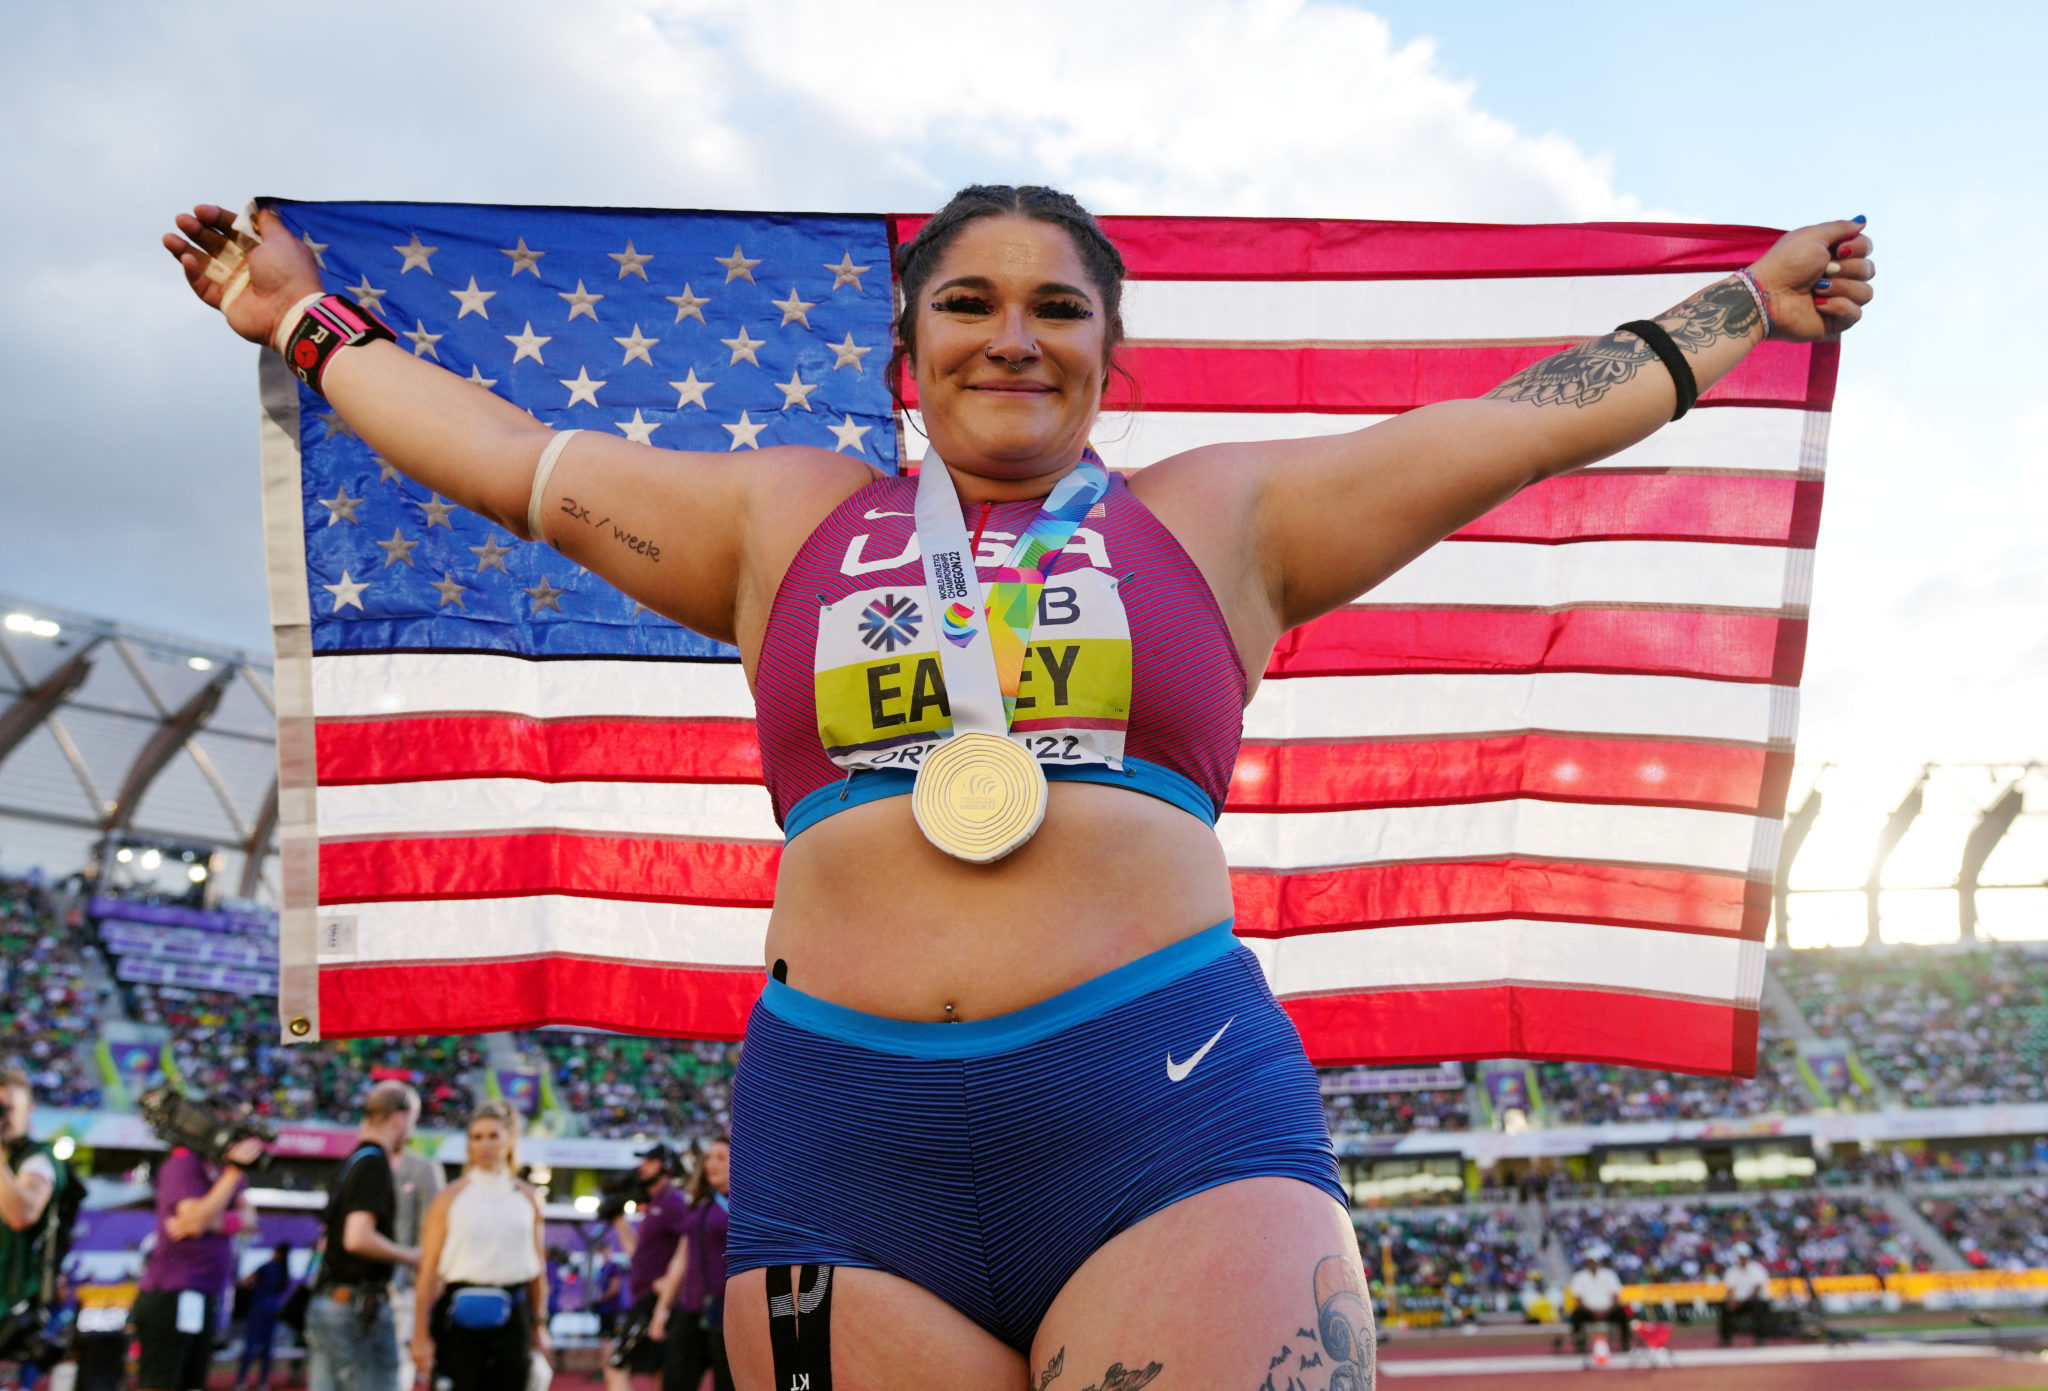 Chase Ealey Wins Us Womens Shot Put World Title Inquirer Sports